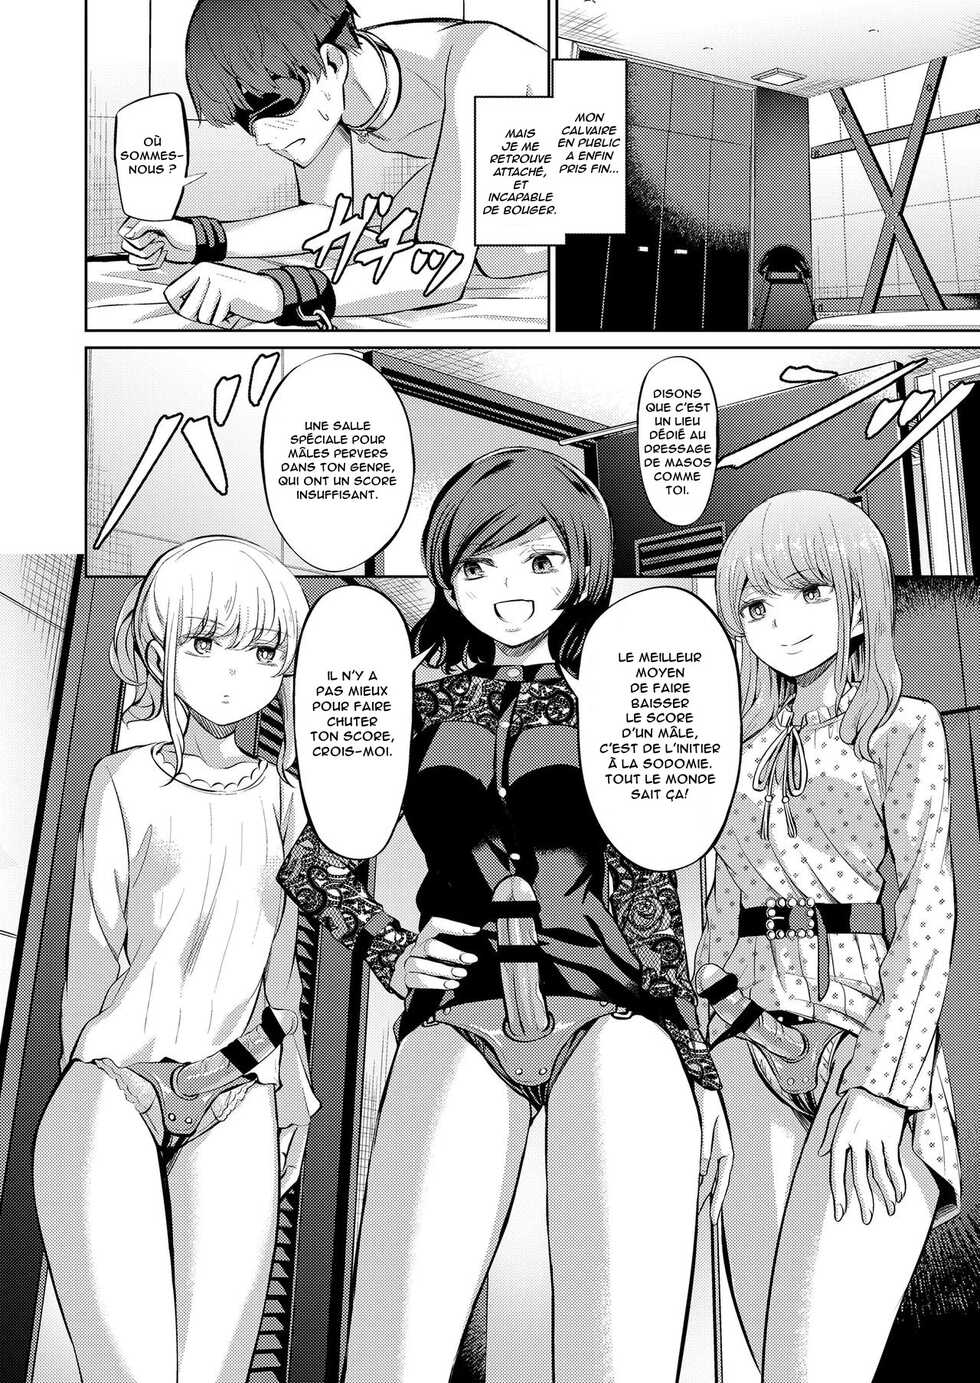 [Yamahata Rian] Tensuushugi no Kuni | A Country Based on Point System (Girls forM Vol. 20) [French] [Anatoh] [Digital] - Page 18